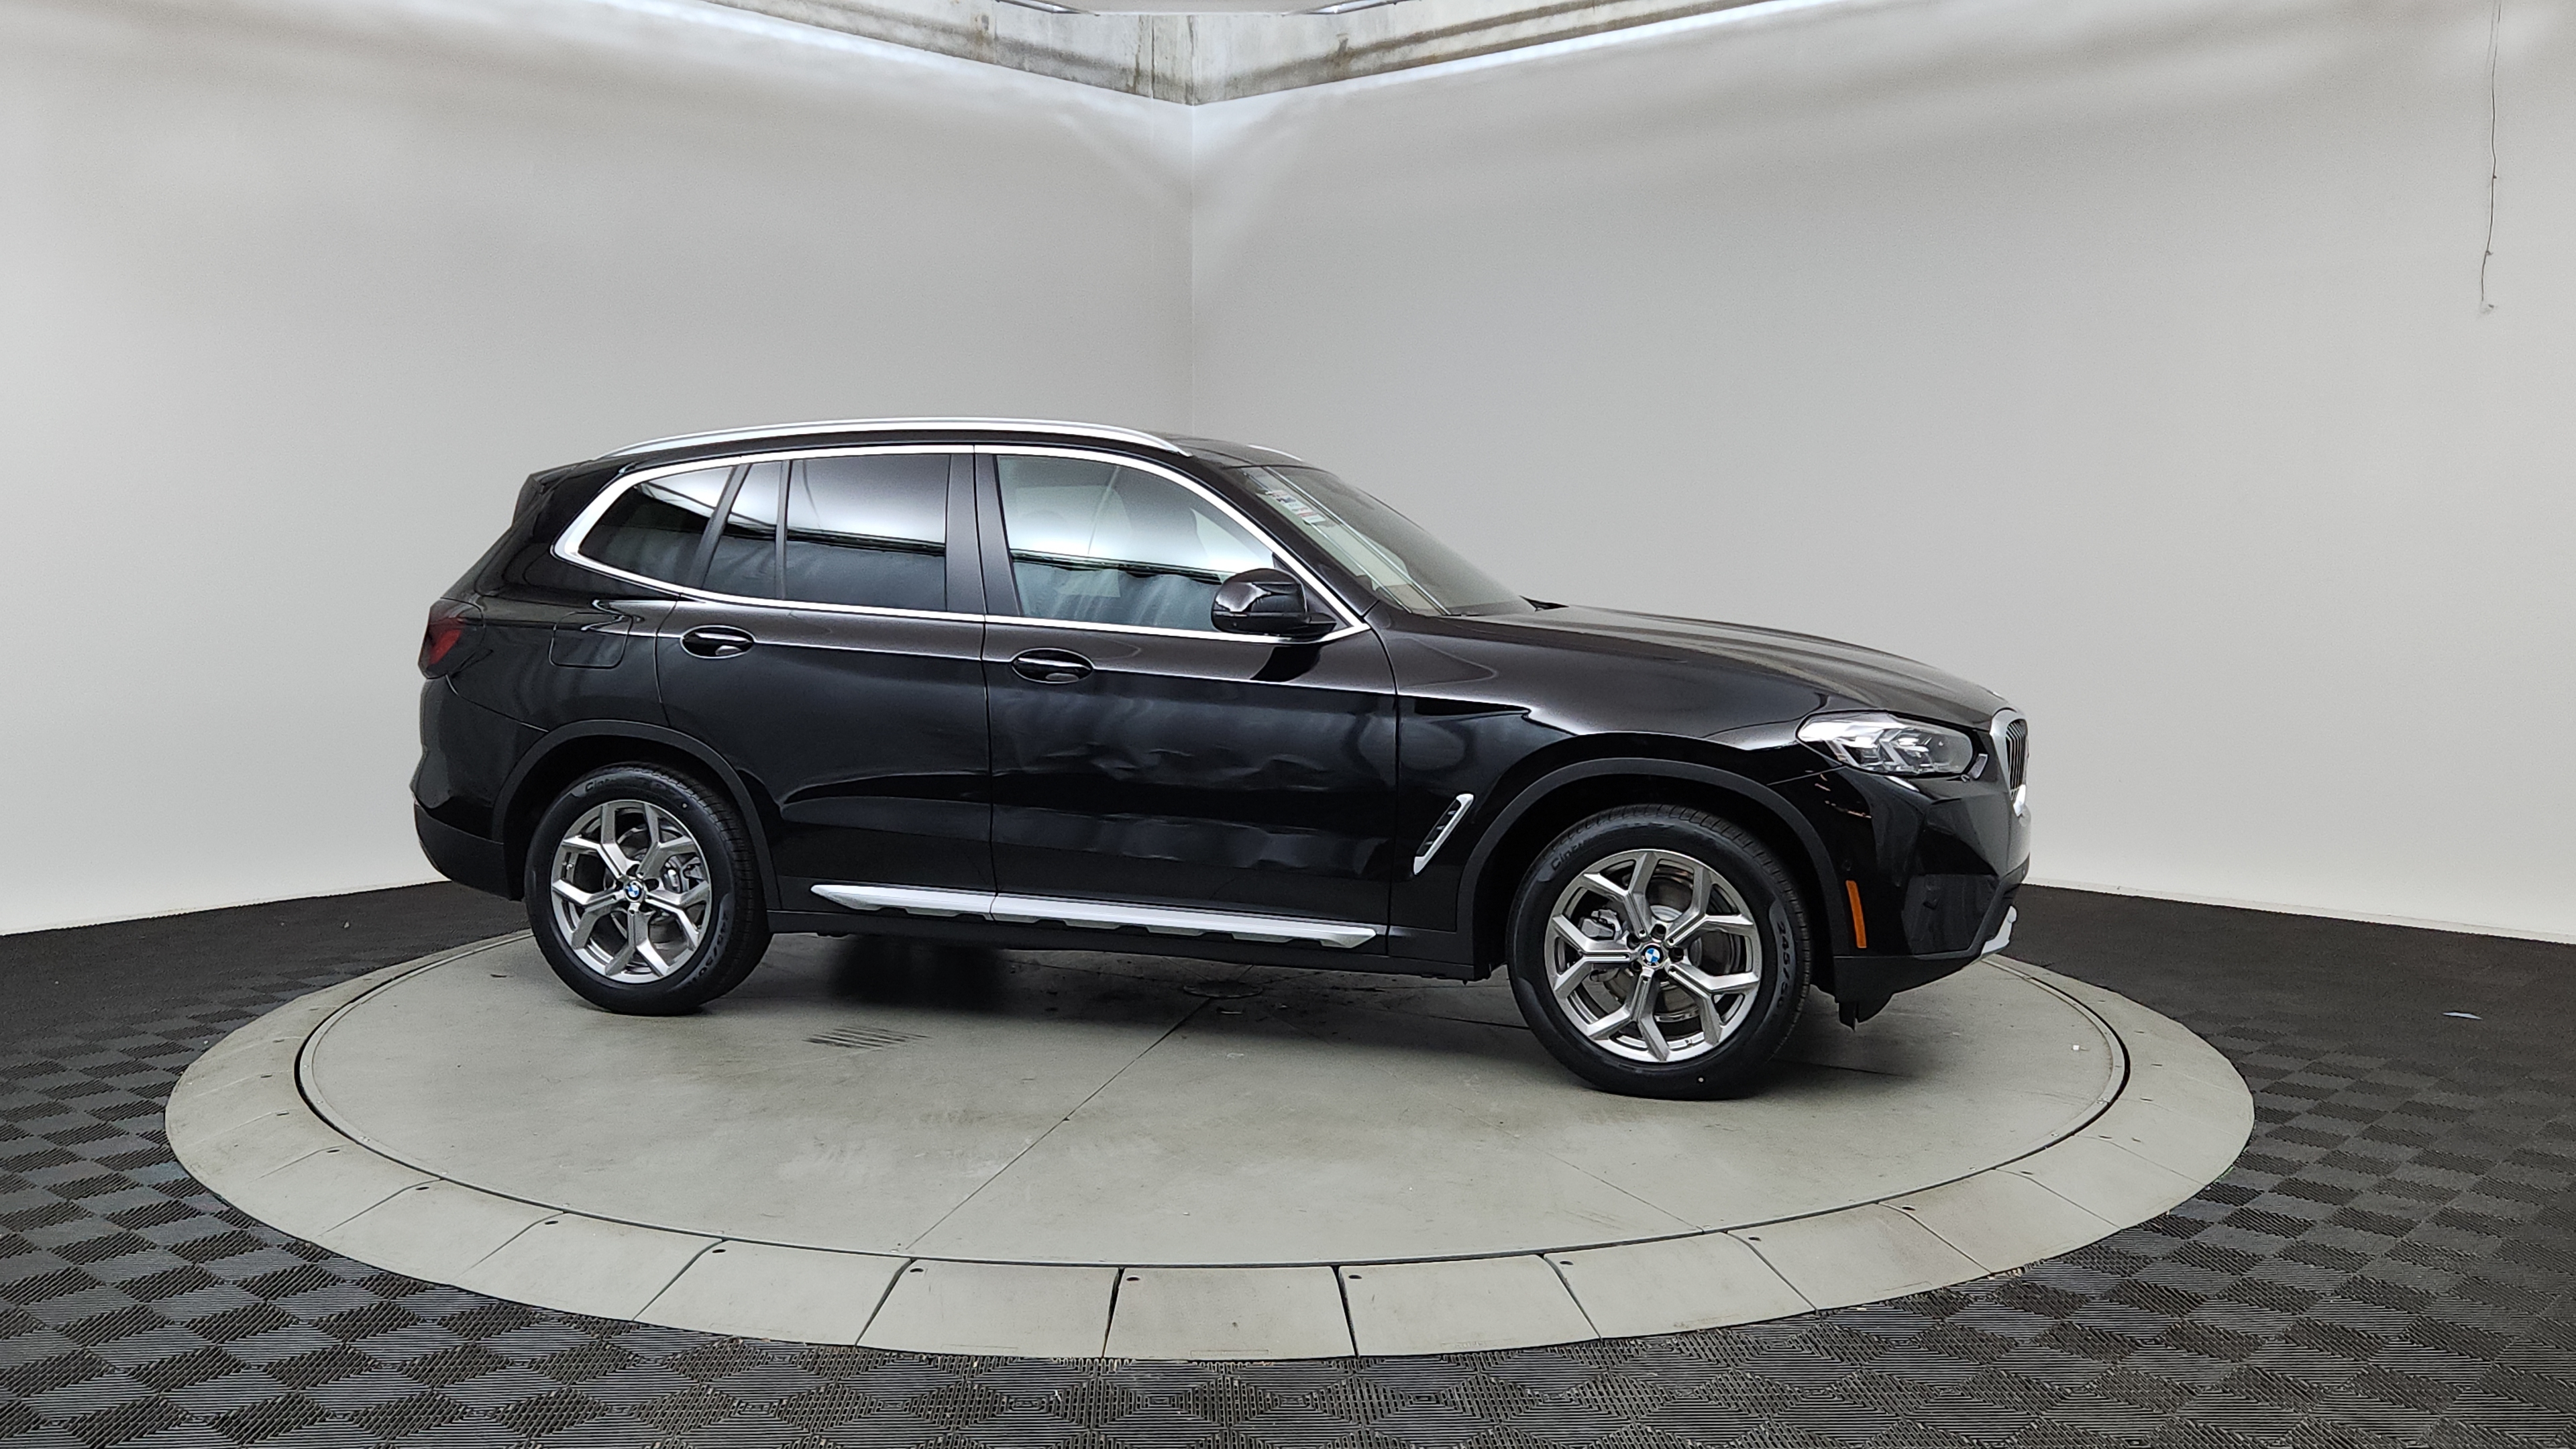 New BMW SUVs For Sale in Tigard | BMW of Tigard